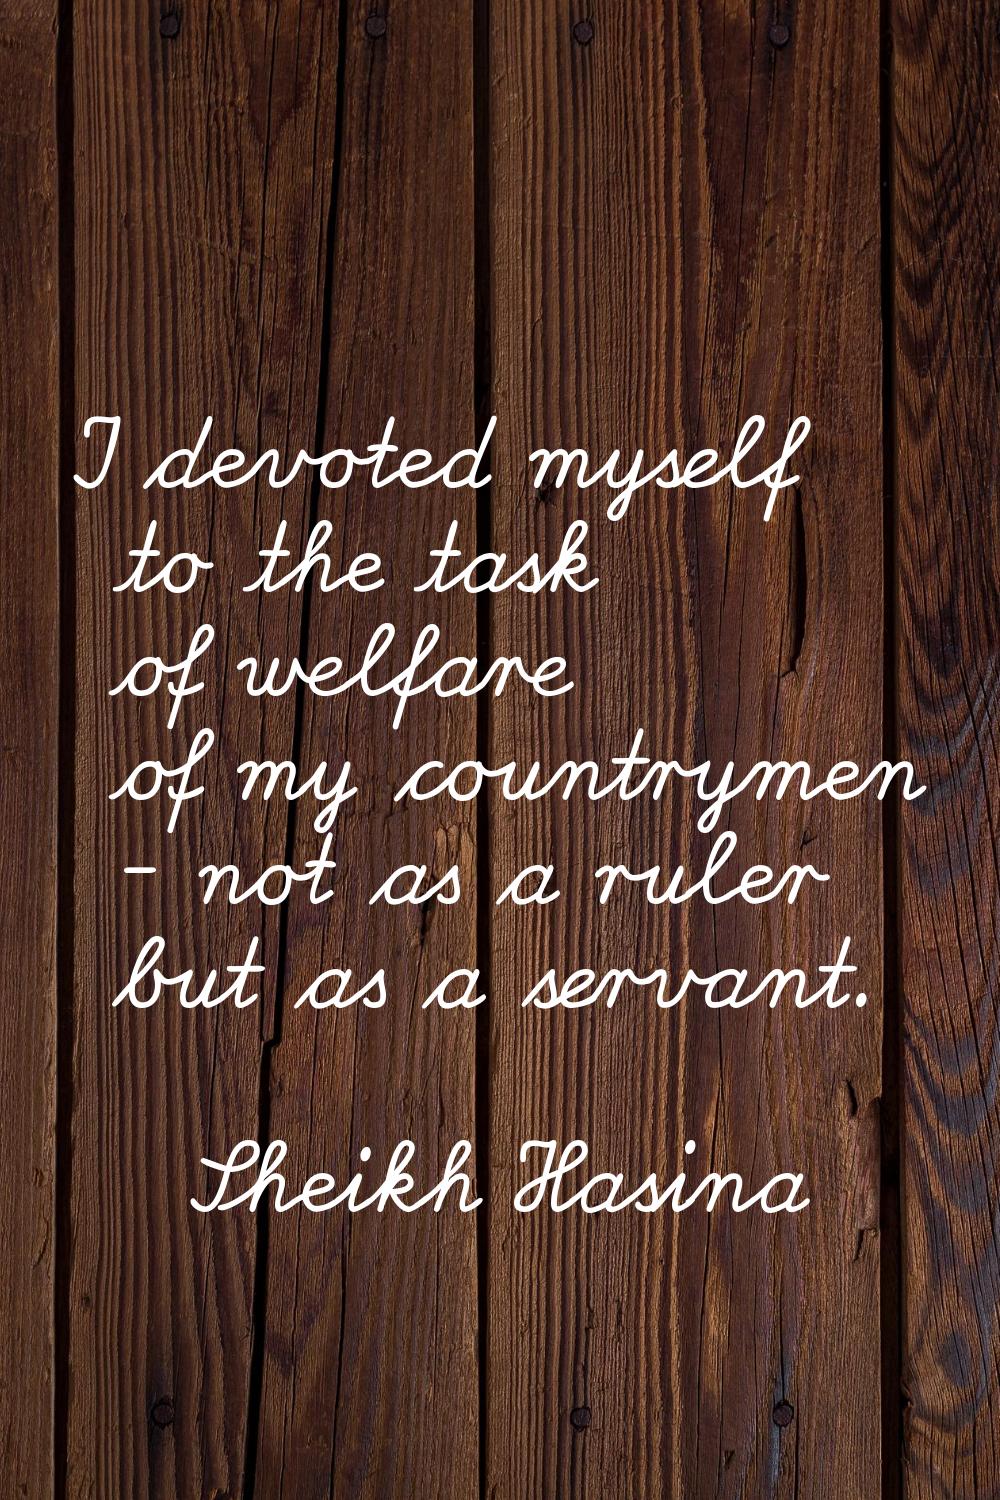 I devoted myself to the task of welfare of my countrymen - not as a ruler but as a servant.